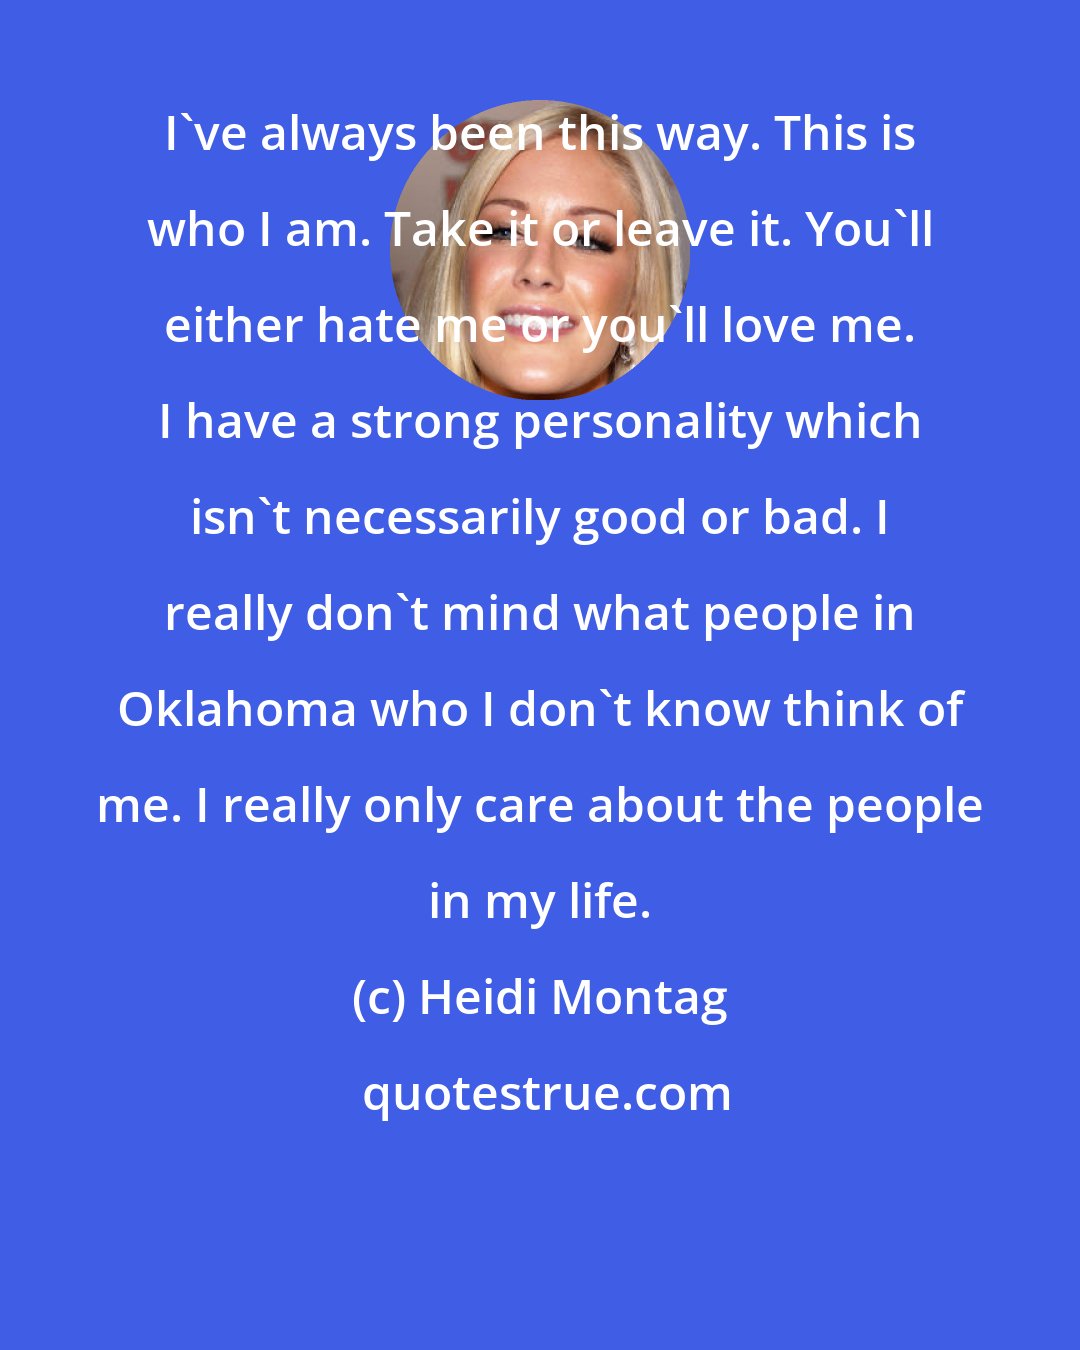 Heidi Montag: I've always been this way. This is who I am. Take it or leave it. You'll either hate me or you'll love me. I have a strong personality which isn't necessarily good or bad. I really don't mind what people in Oklahoma who I don't know think of me. I really only care about the people in my life.